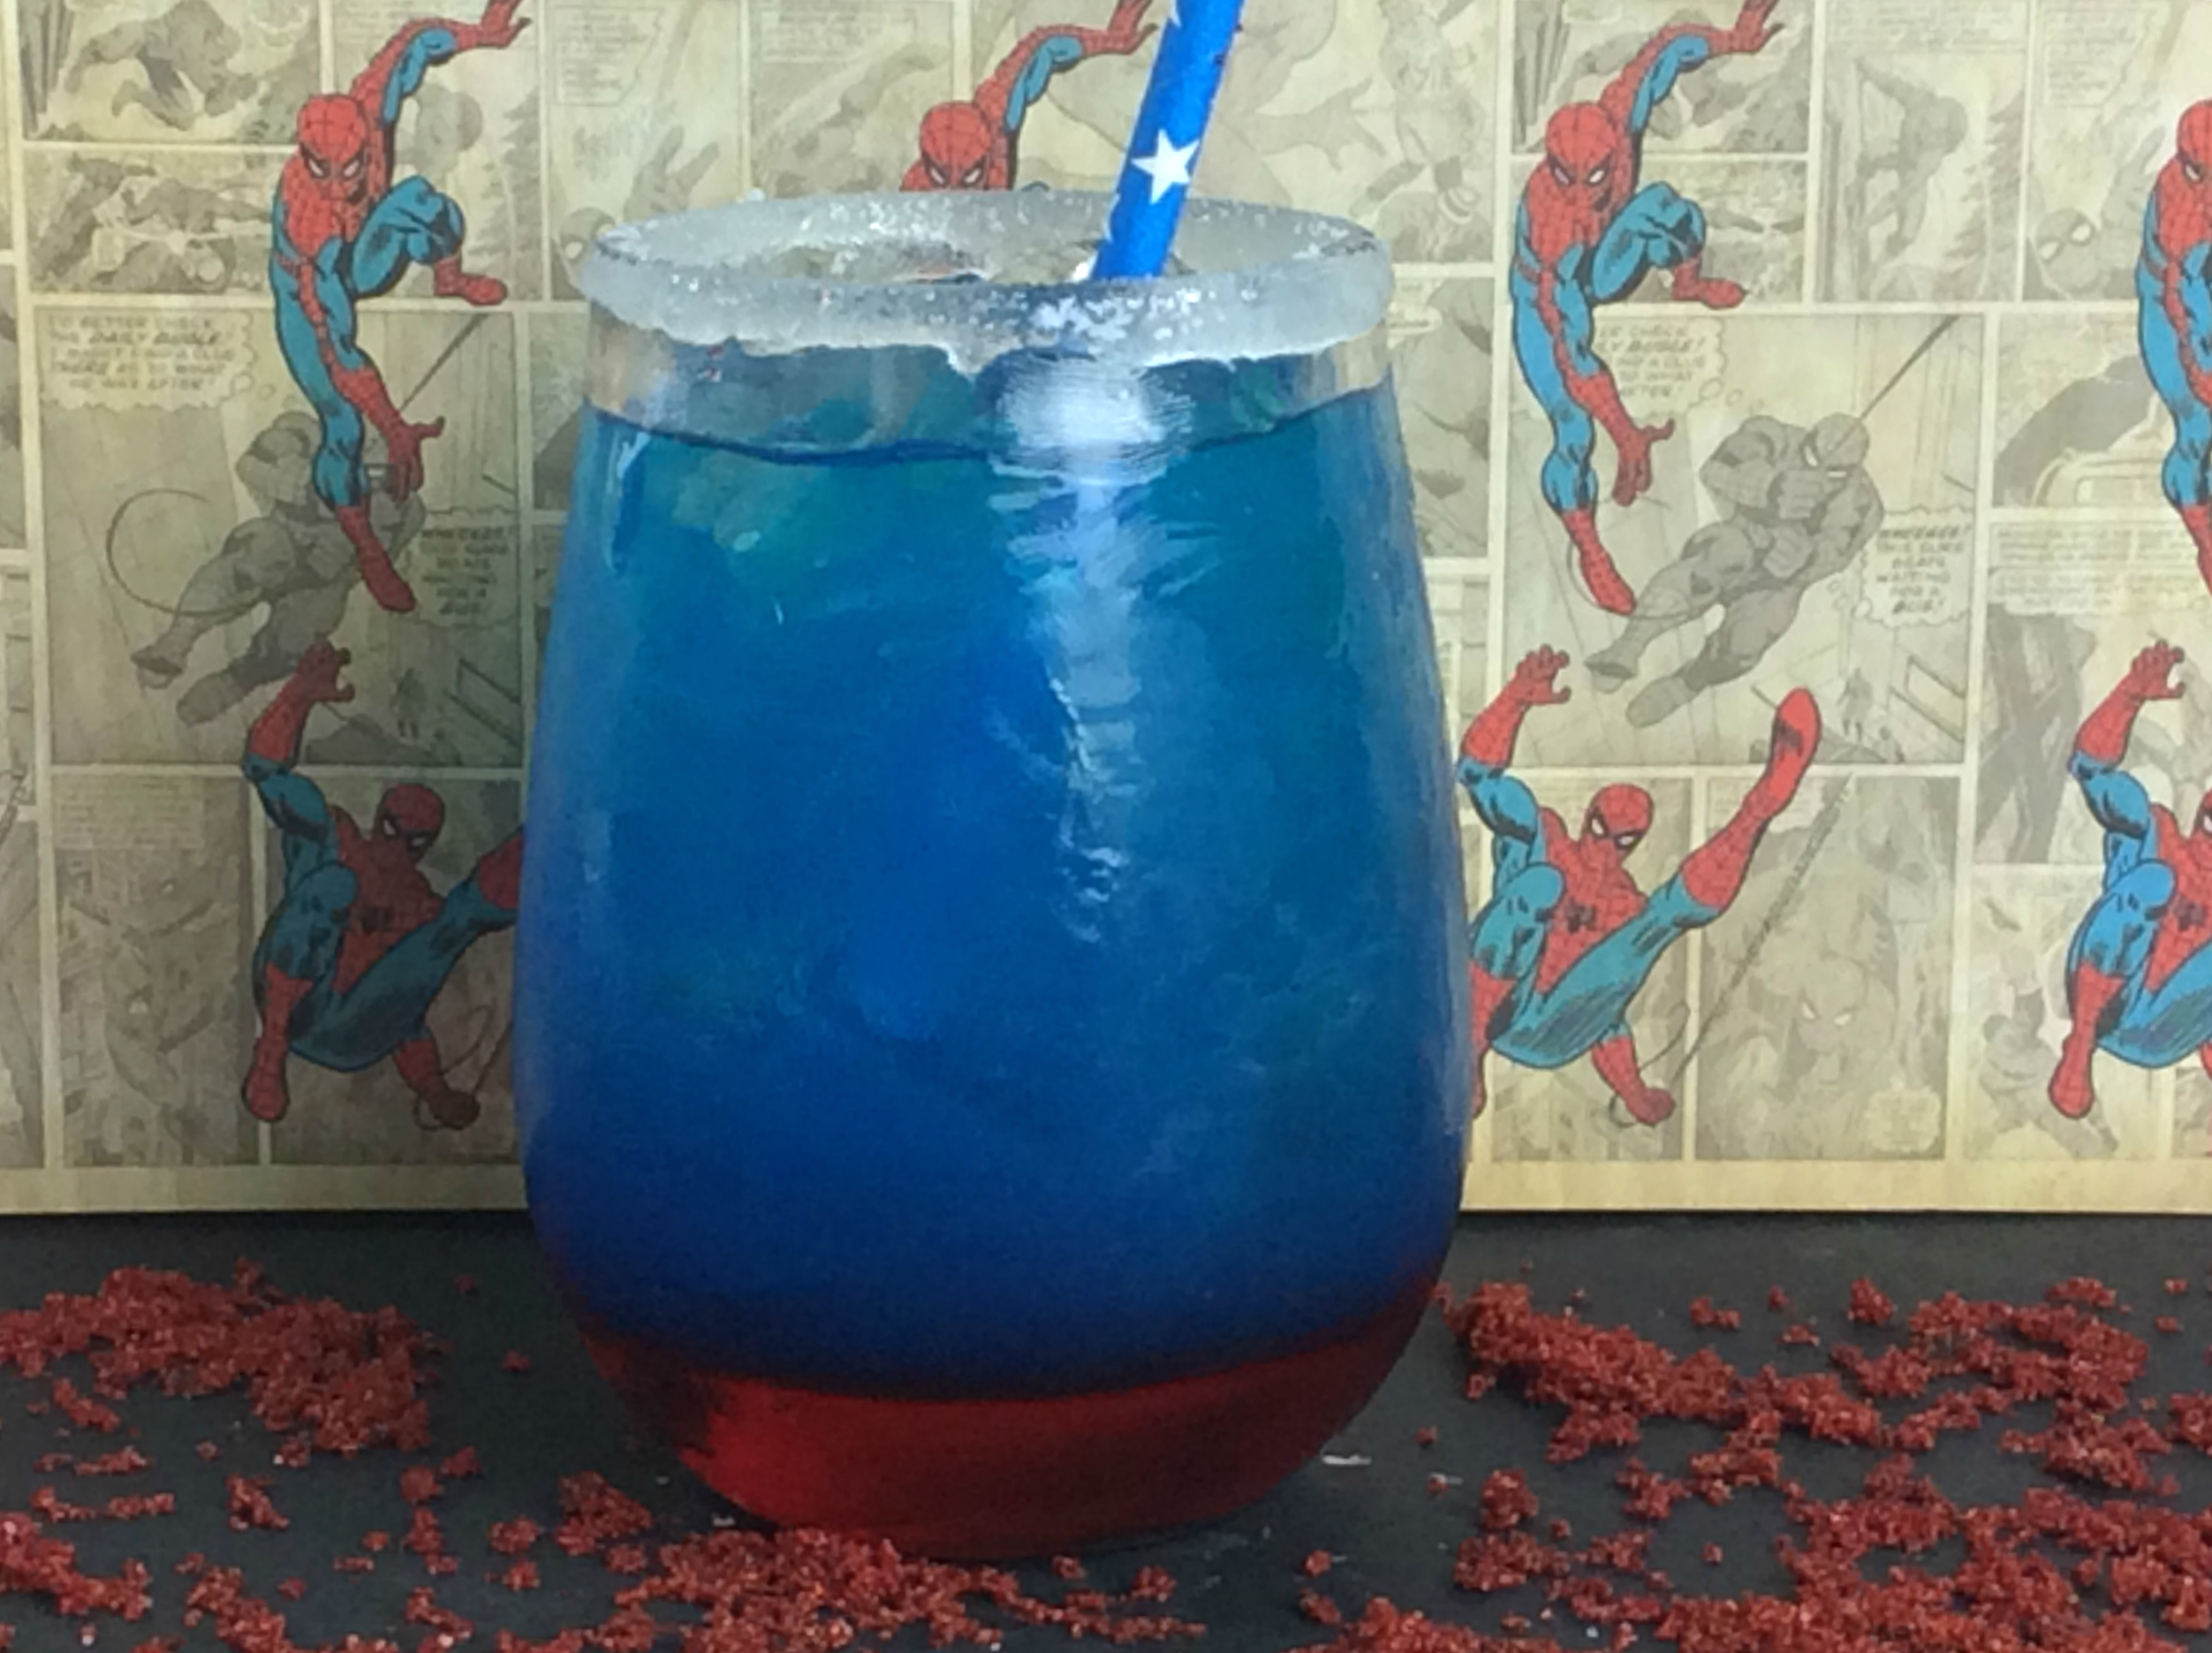 Whether you are looking for a non-alcoholic punch for kids or you have an Amazing Spiderman fan, this simple to make punch is going to make everyone happy.